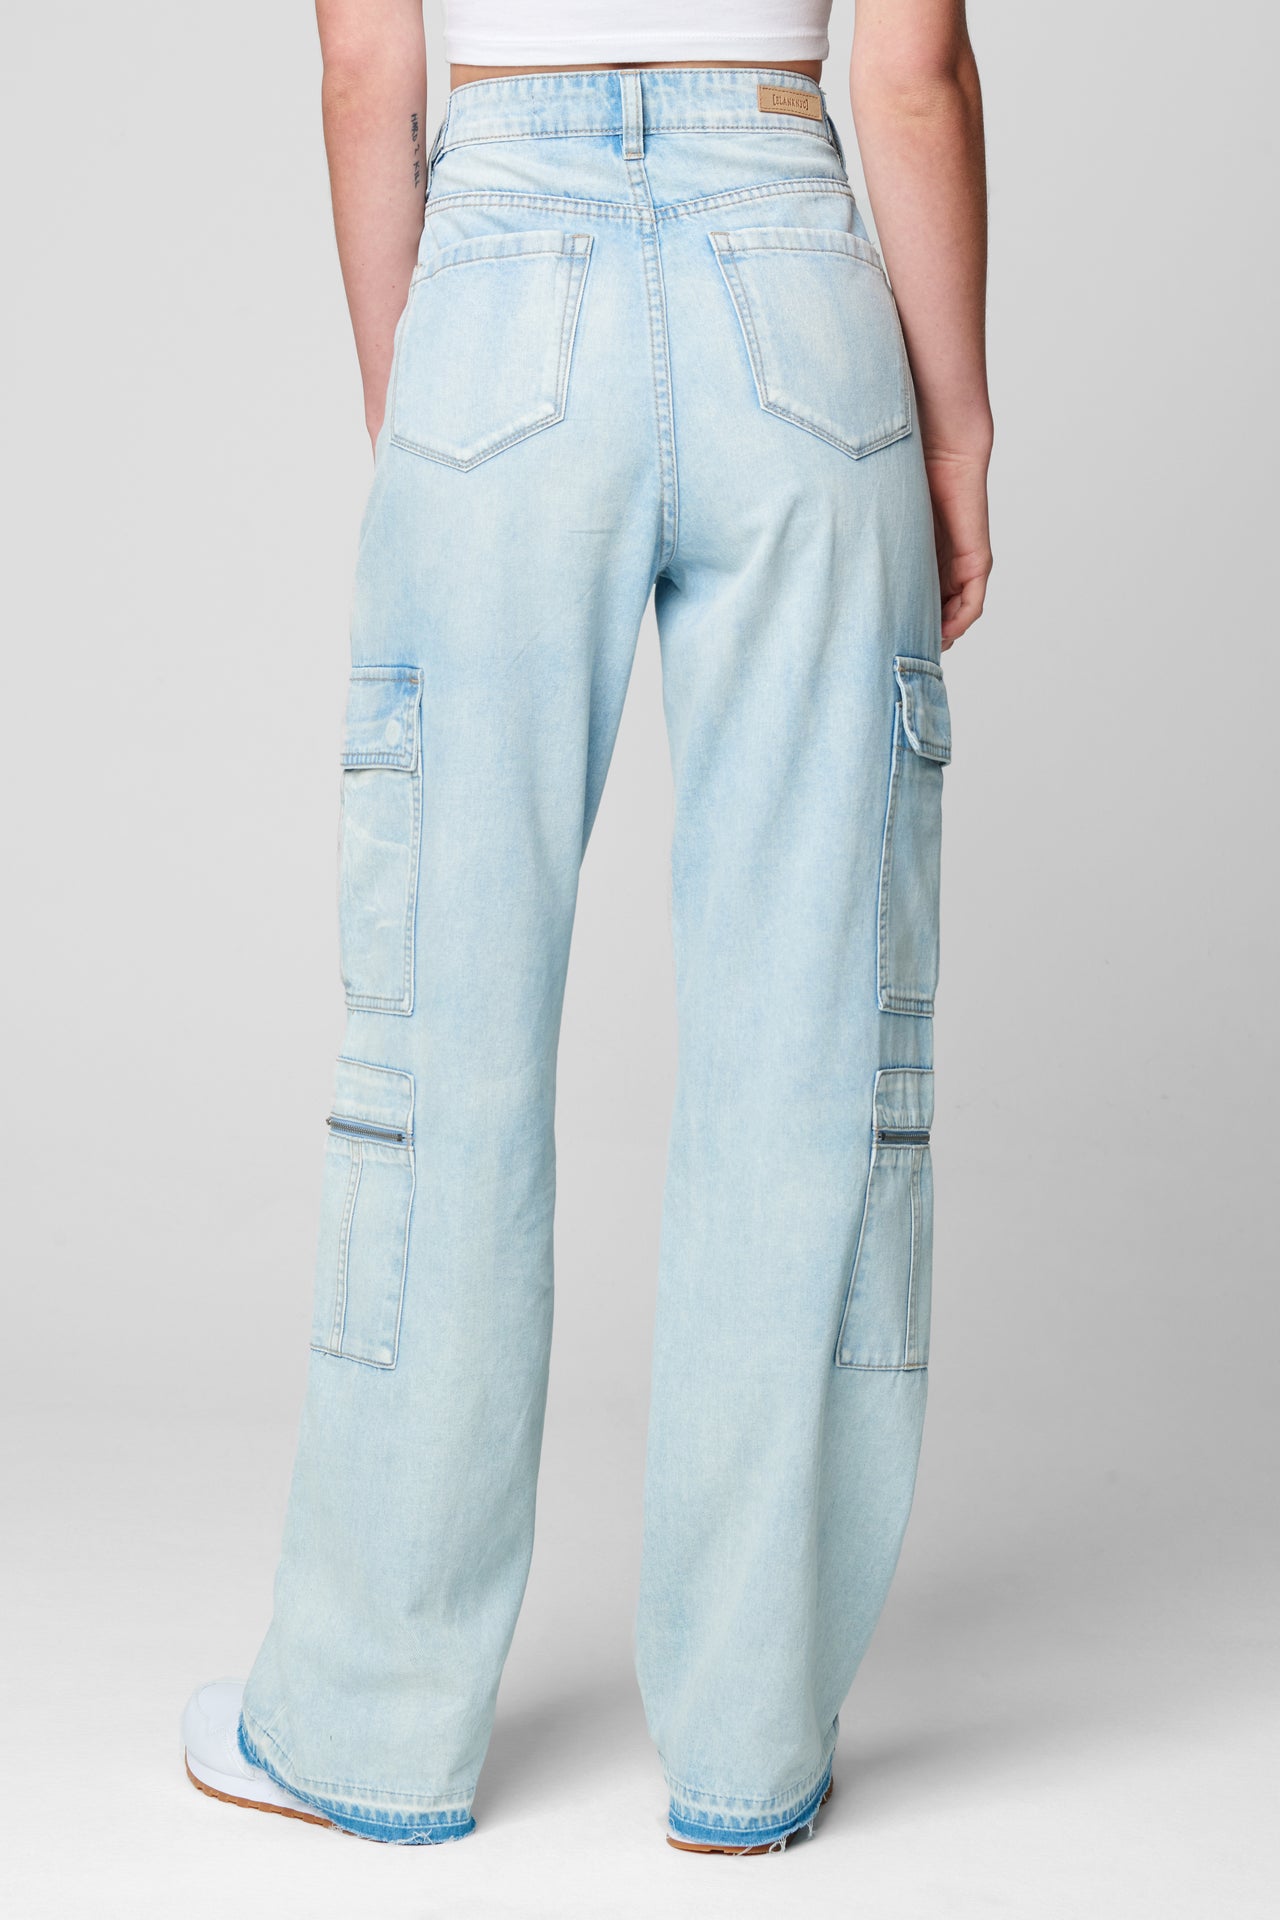 Pants Call | My Name Boutique Cargo Blue LIT